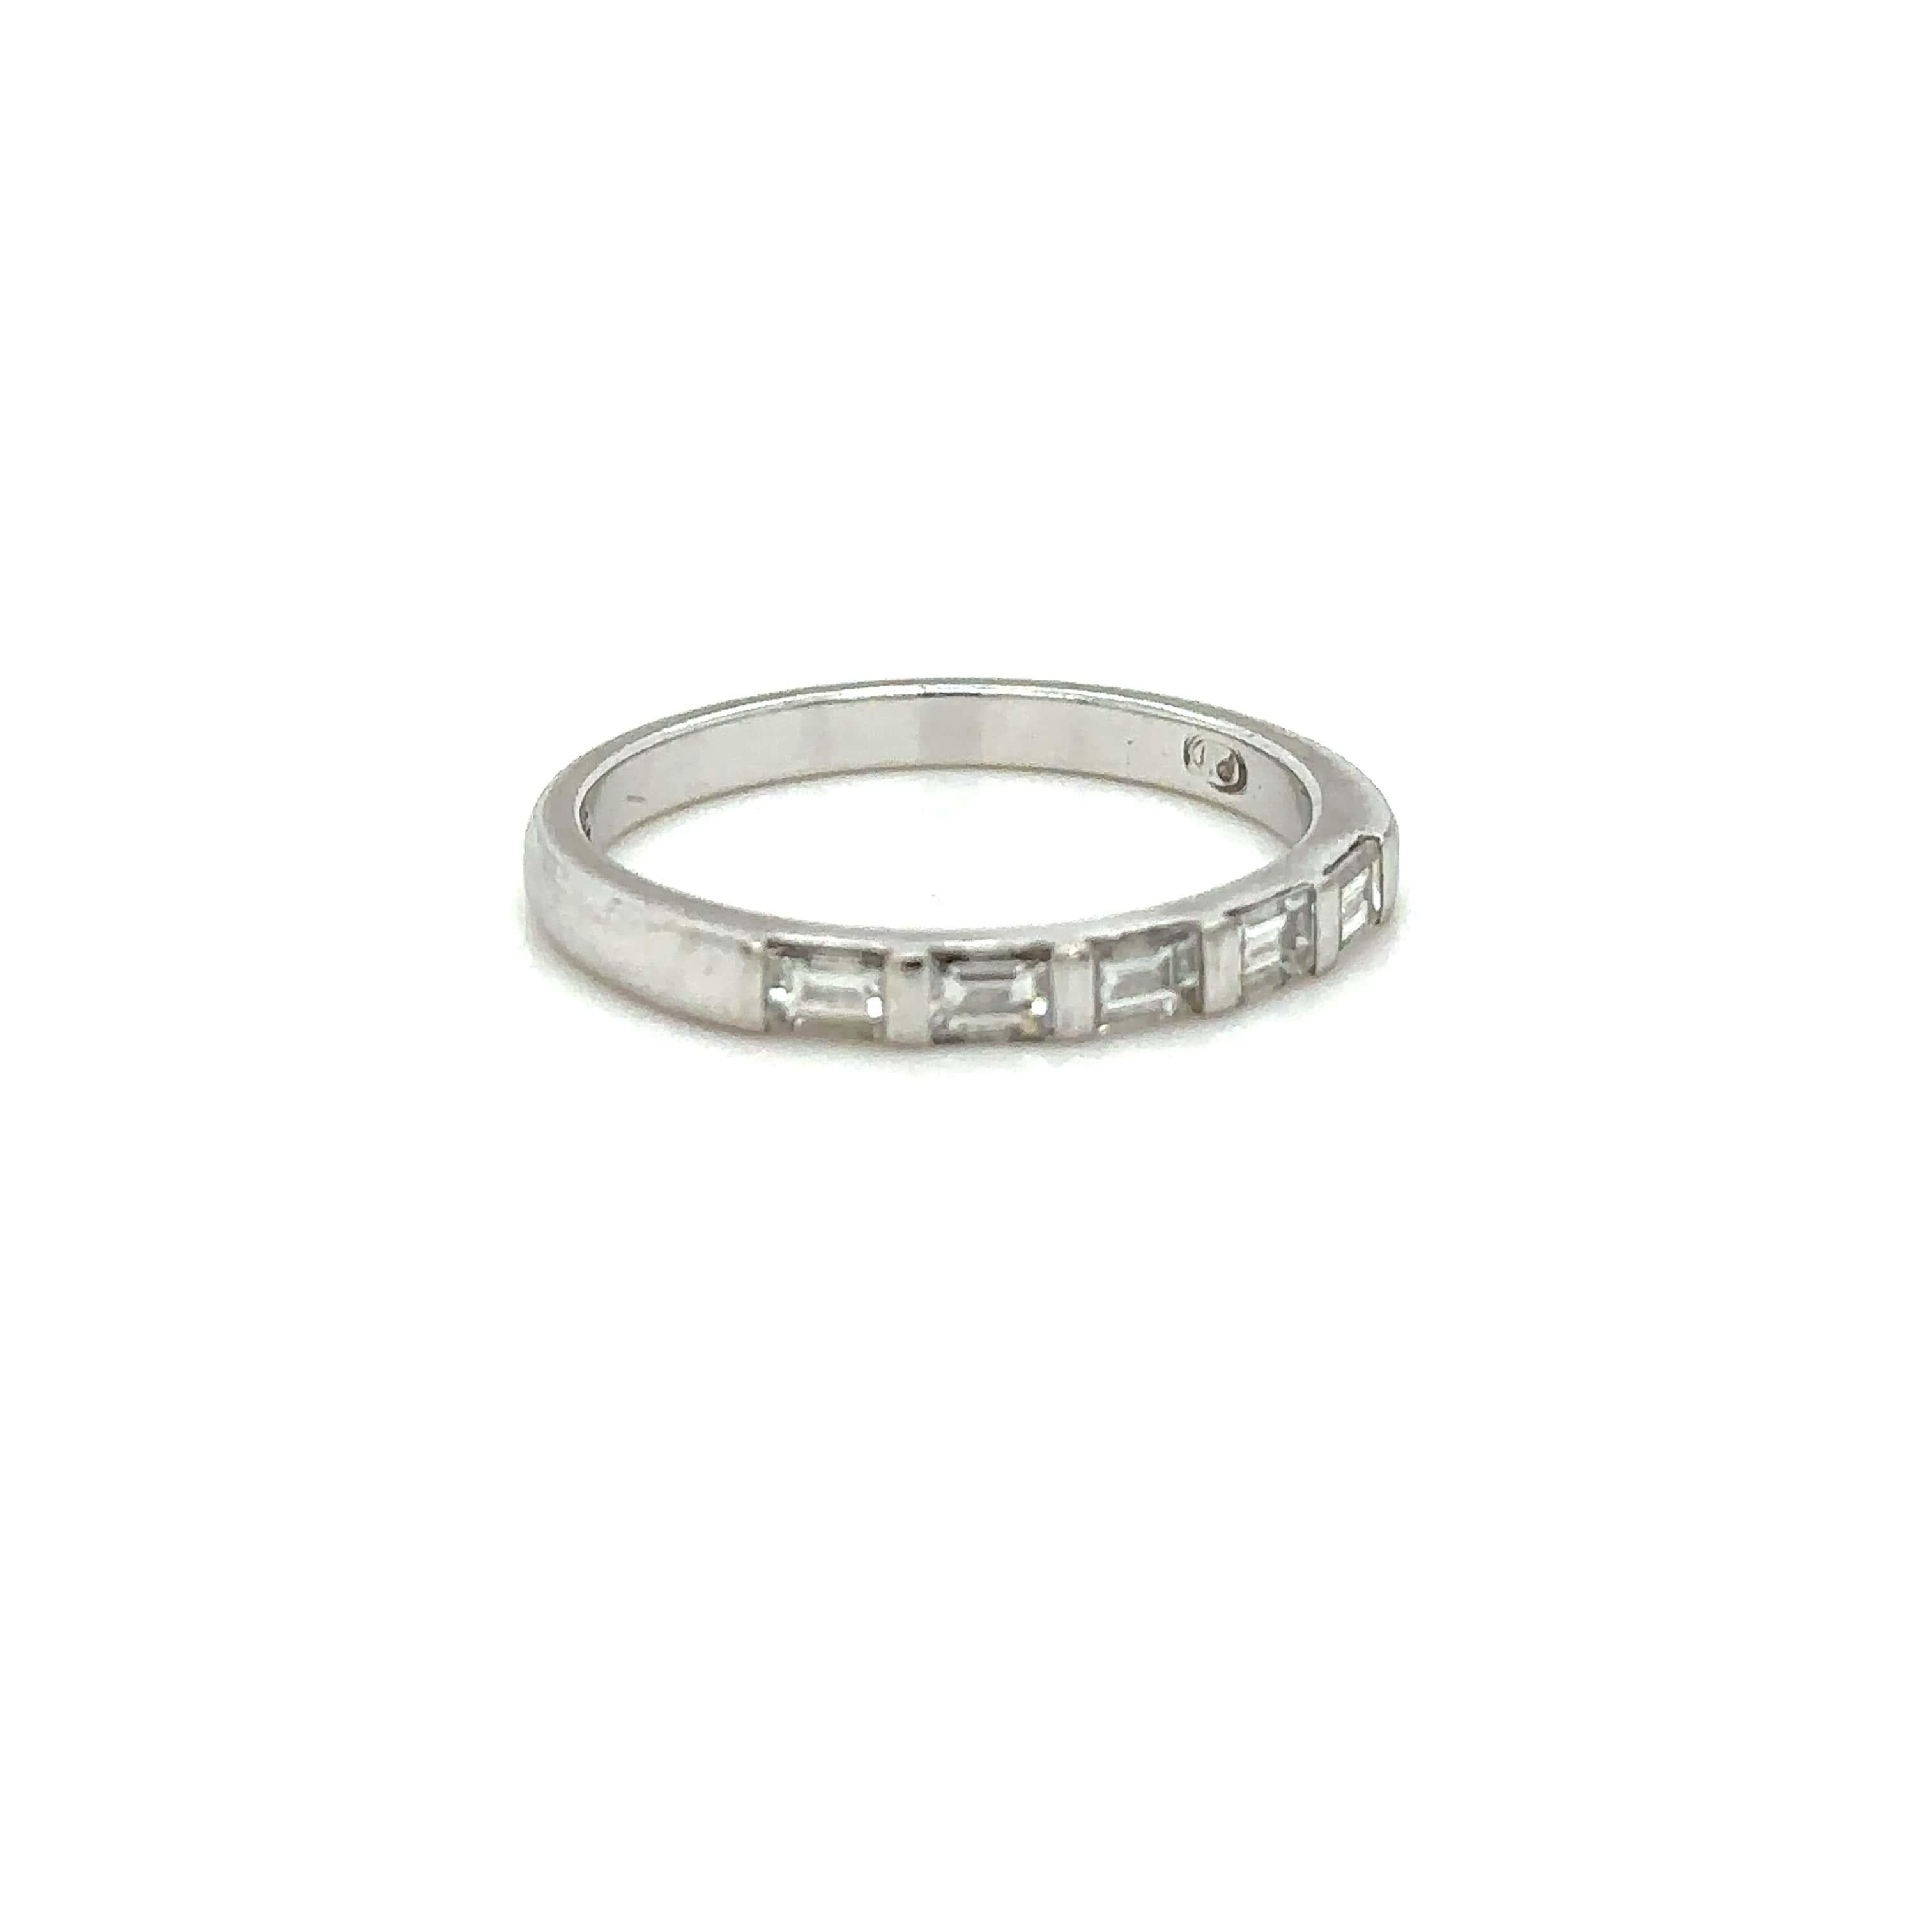 Unique features:
A women's, custom made, diamond Ring 

Diamond half eternity ring. Made of 18 kt White Gold, and ring size of N 1/2, and weighing 2.7gm. Stamped: 18ct. 

Total quantity of 5 baguette, step cut Diamonds, colour F and clarity VS. with